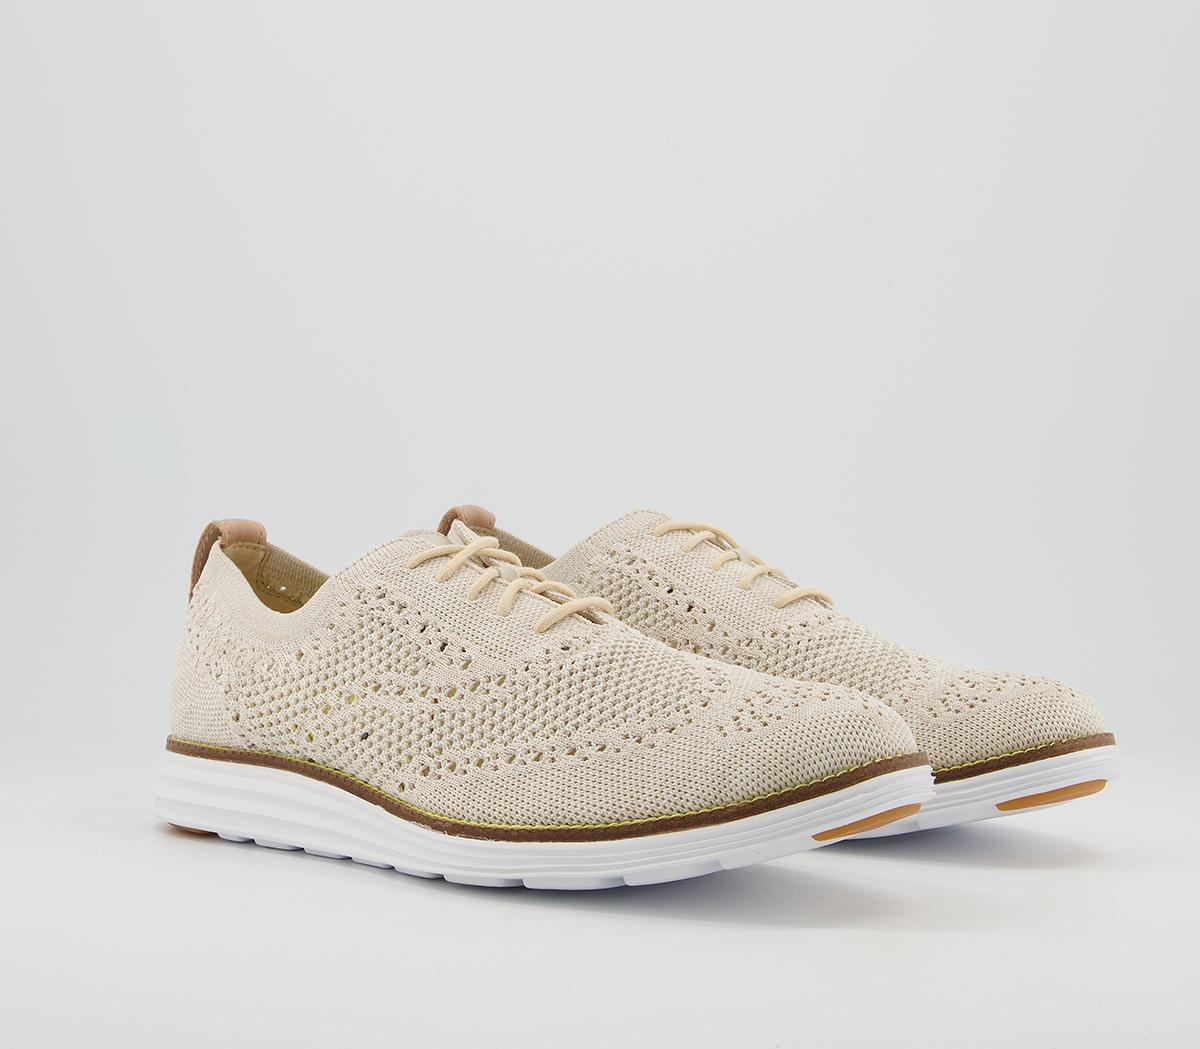 Cole Haan Original Grand Stitchlite Oxford Shoes Cement Twisted Knit ...